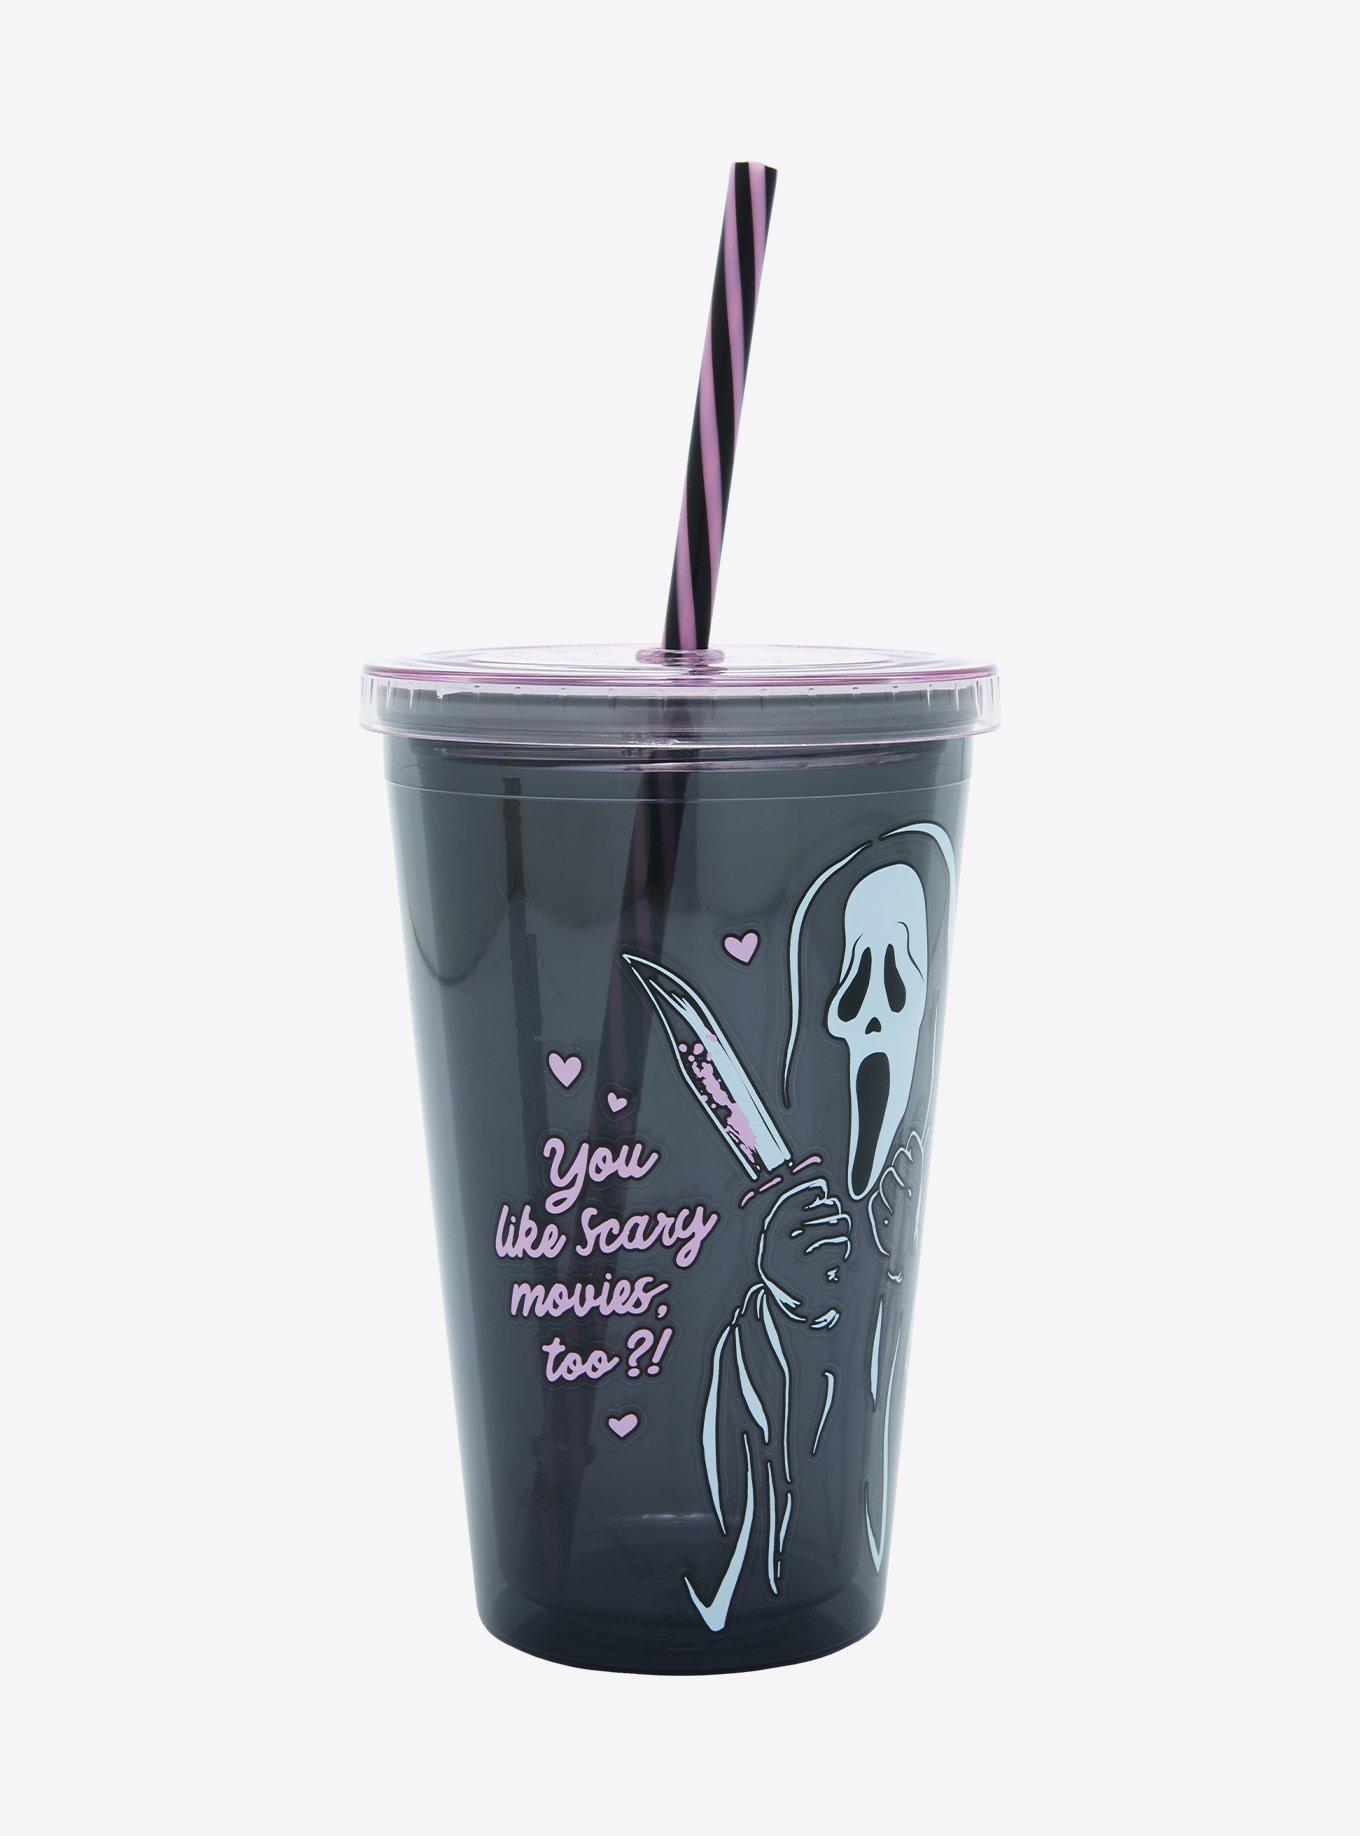 Halloween Straw Cover Caps 4-Pack for $6